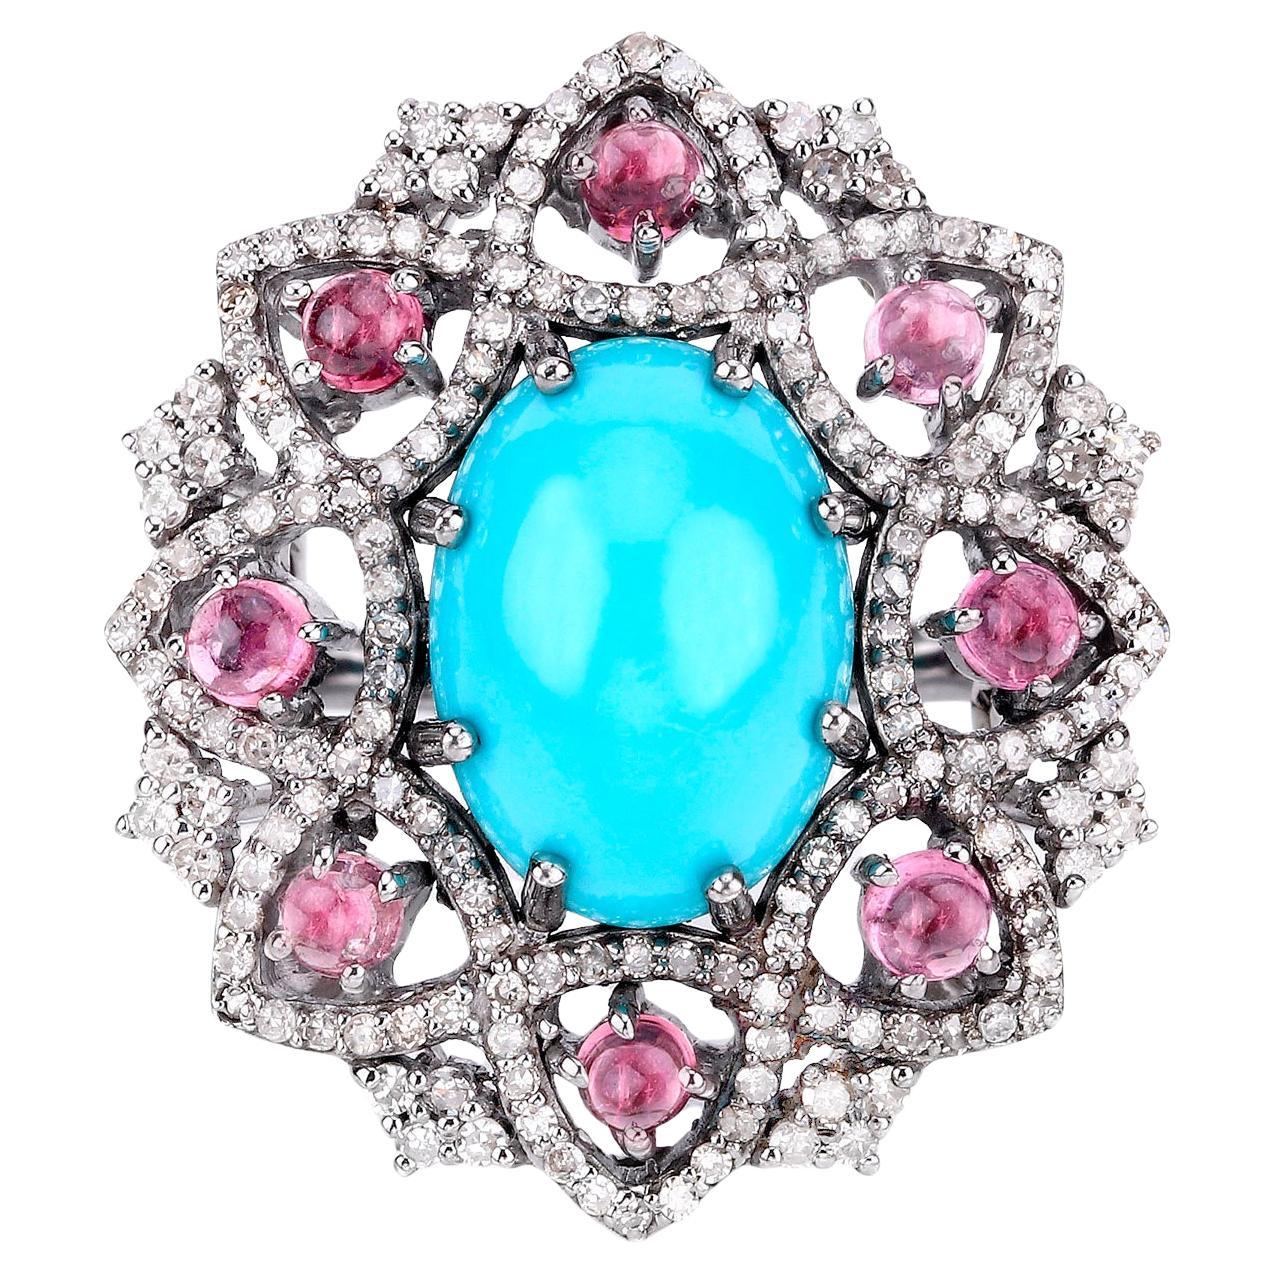 Turquoise Floral Cocktail Ring Pink Tourmalines Diamonds 7.5 Carats For Sale